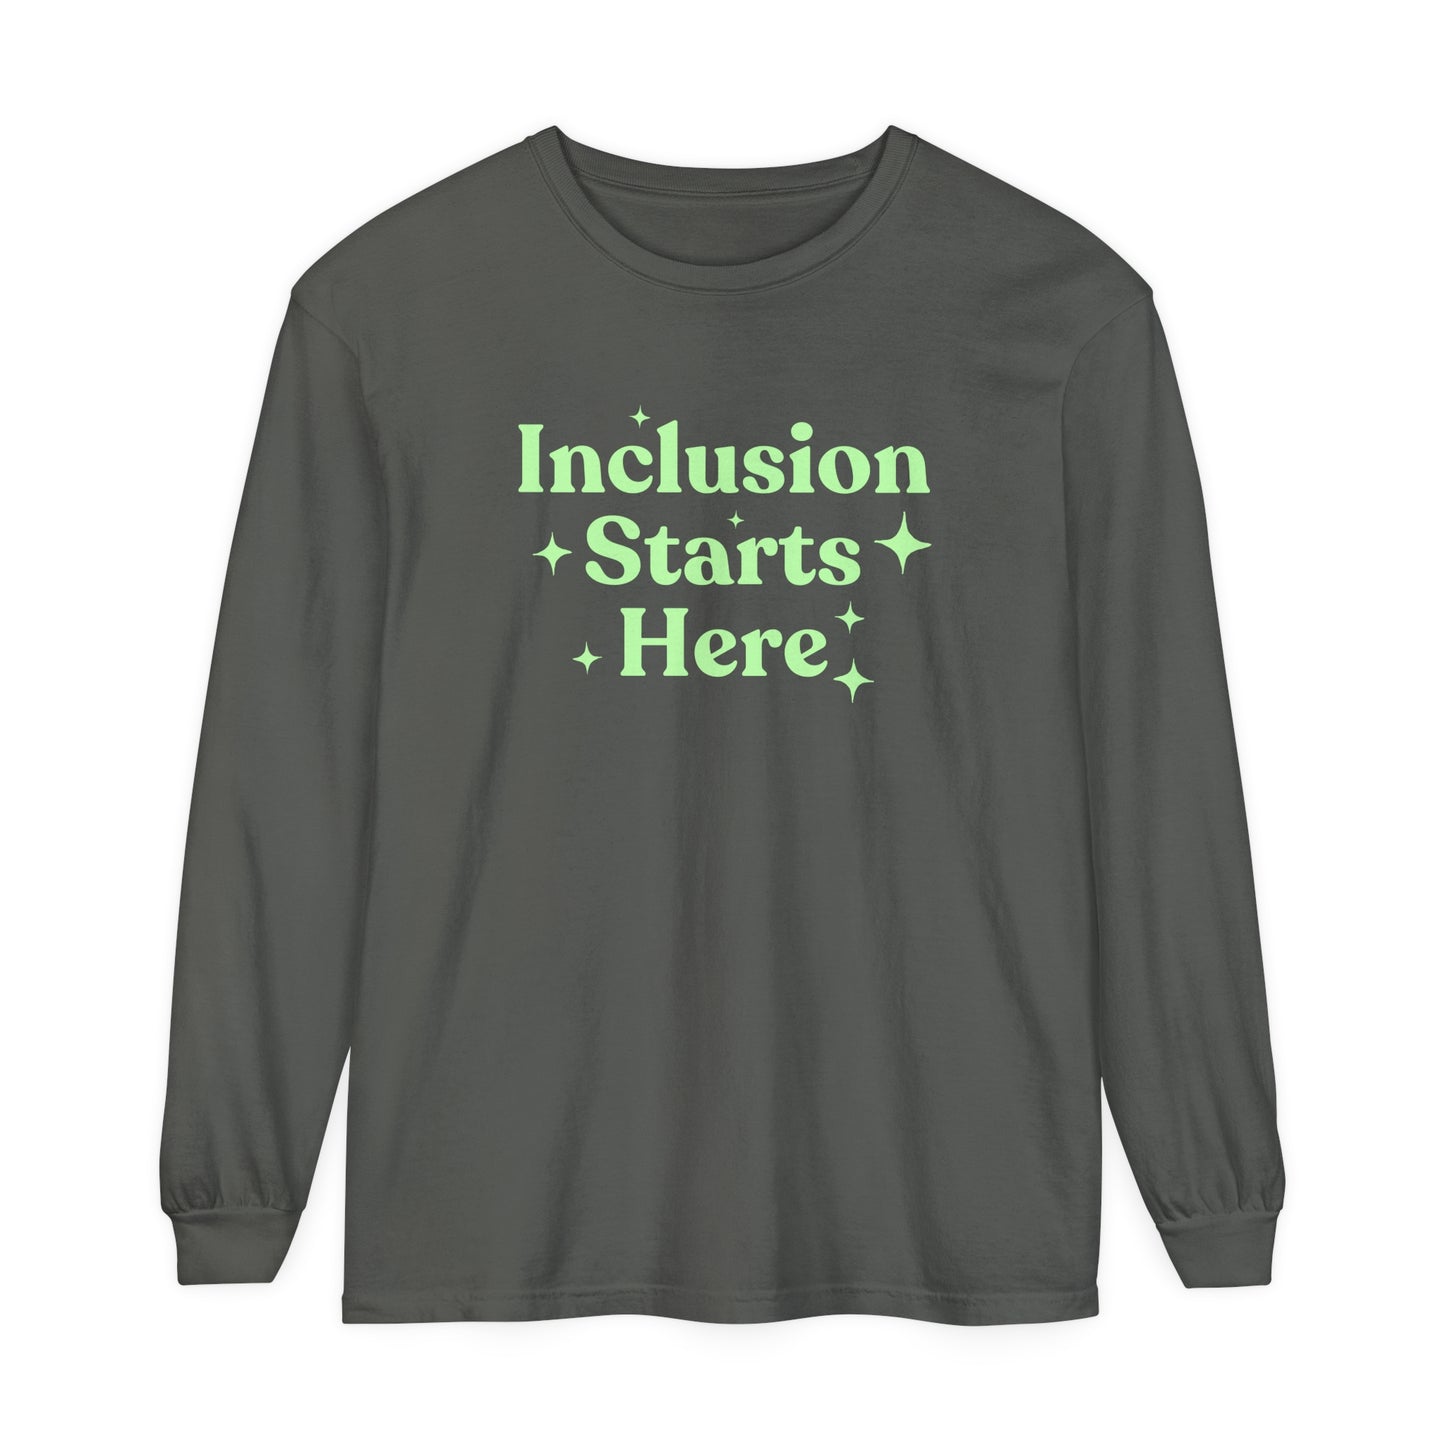 Inclusion Starts Here Long Sleeve Comfort Colors T-Shirt